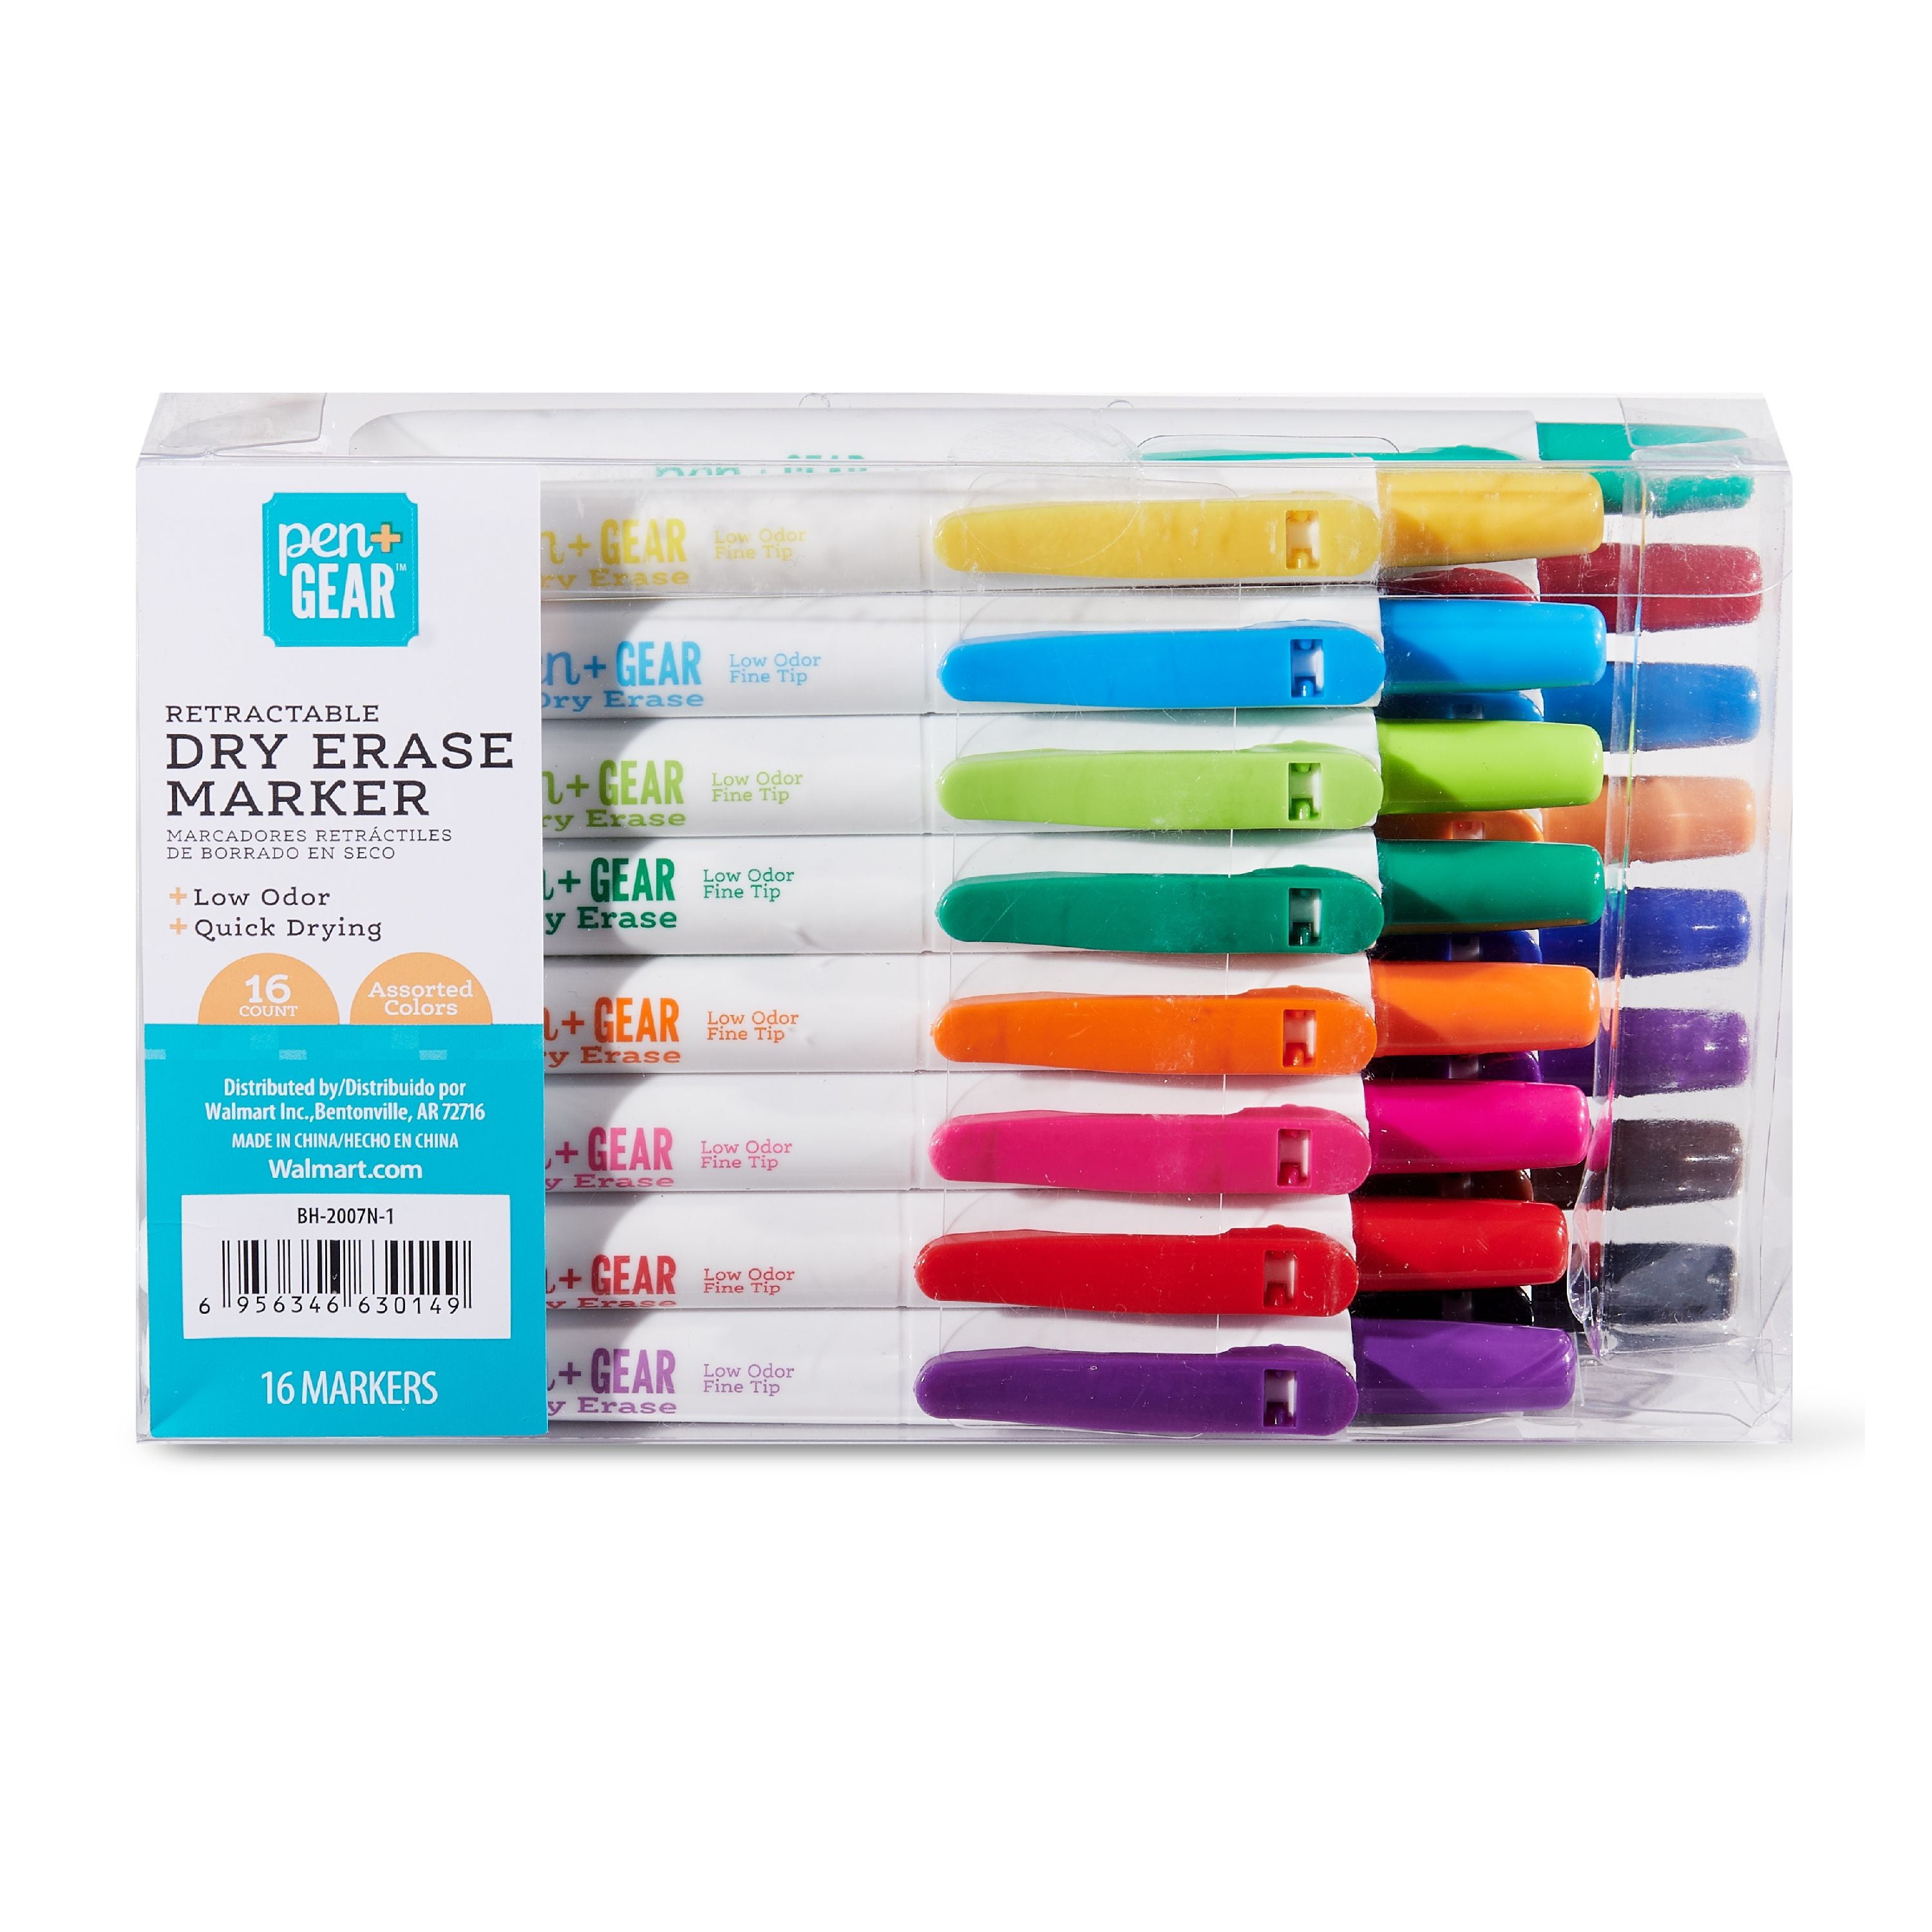 Hello Hobby Washable Dual Tip Markers, Classic Colors, 12Pcs, #40137